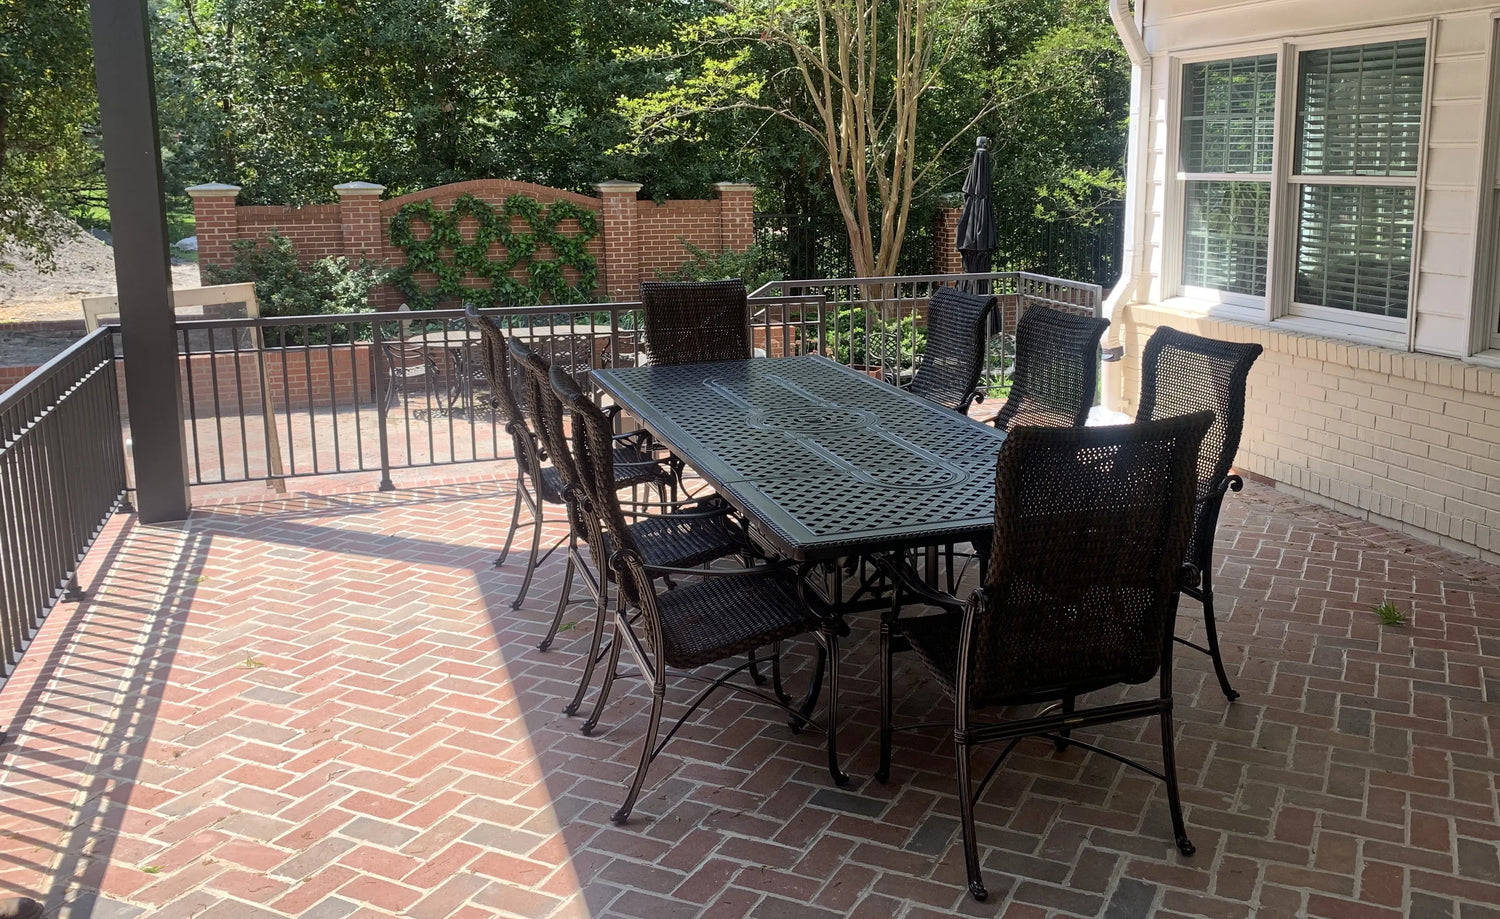 Extension Patio Dining in Mount Airy, NC